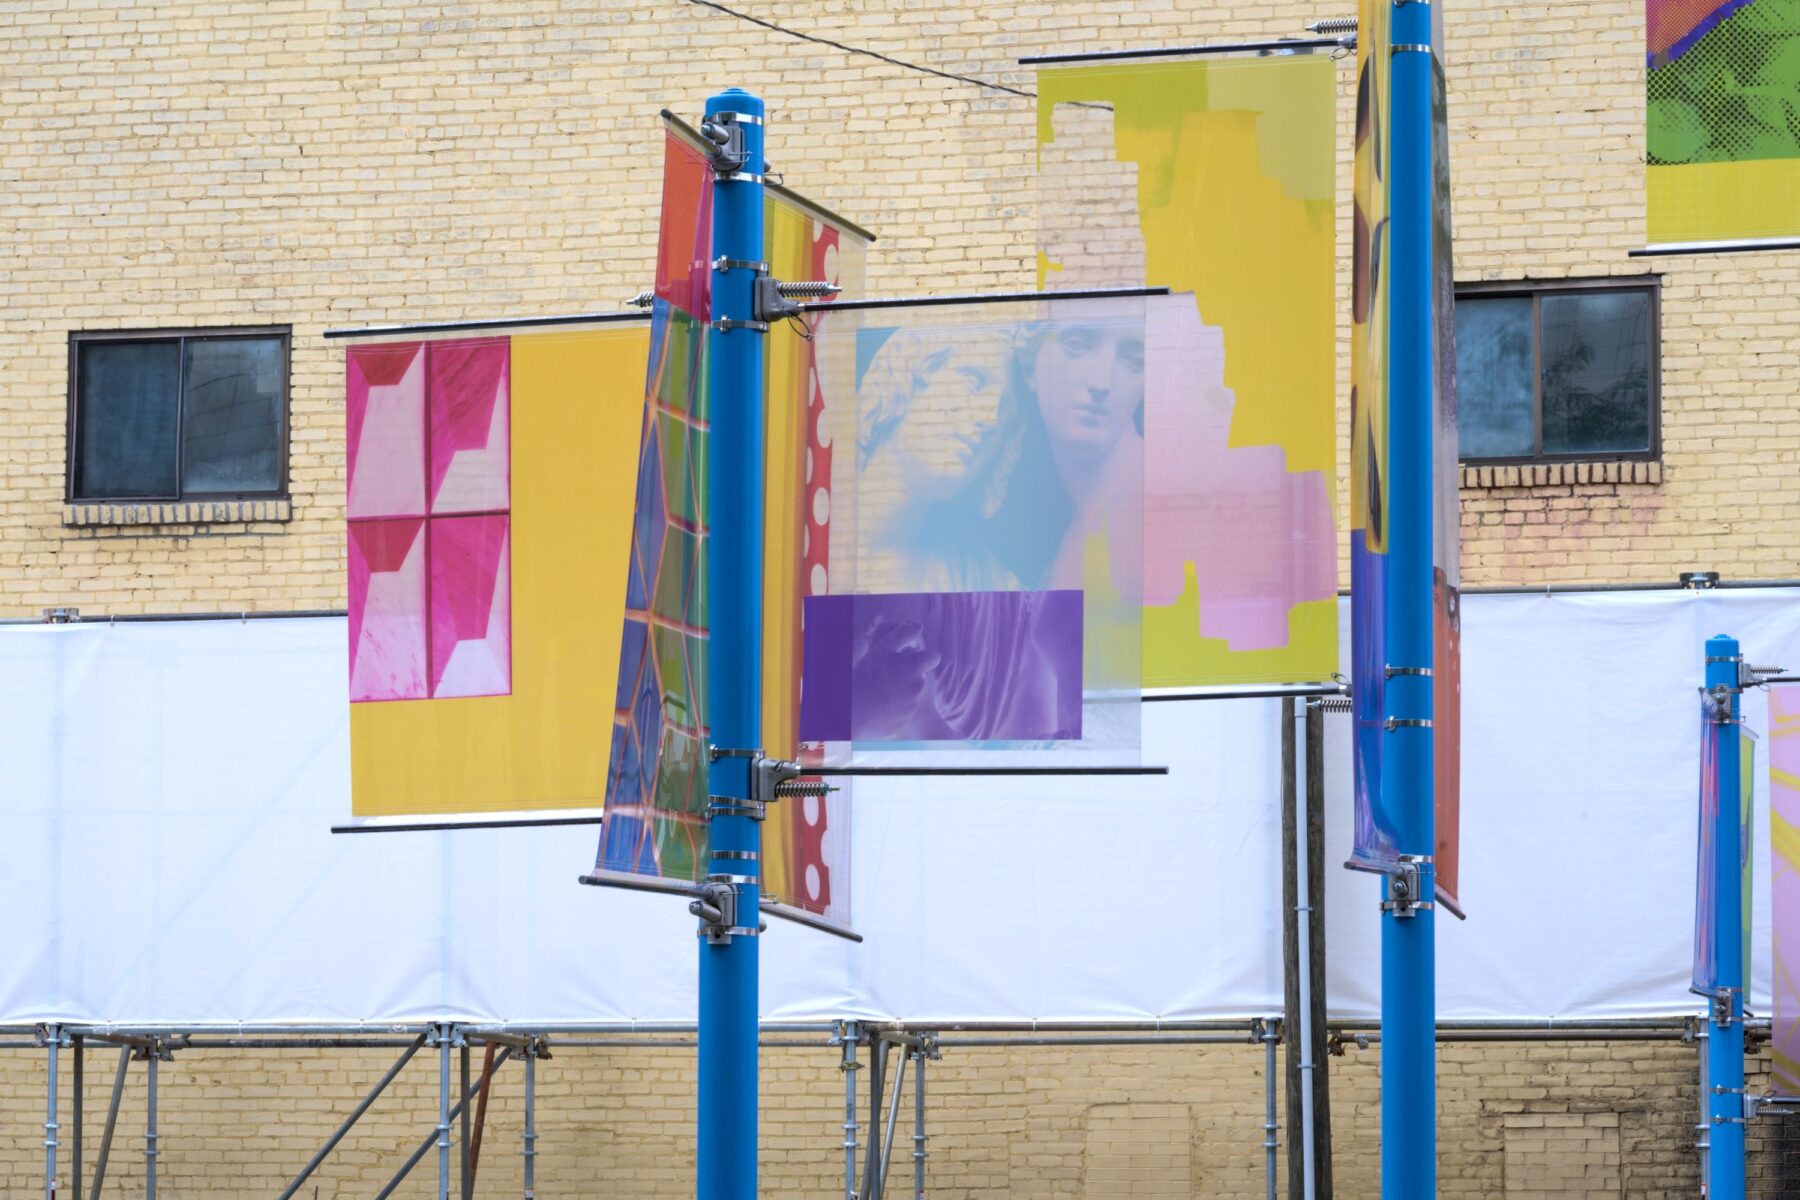 Installation image of art on 2 blue poles each with two colorful transparent banners that have various images on them.